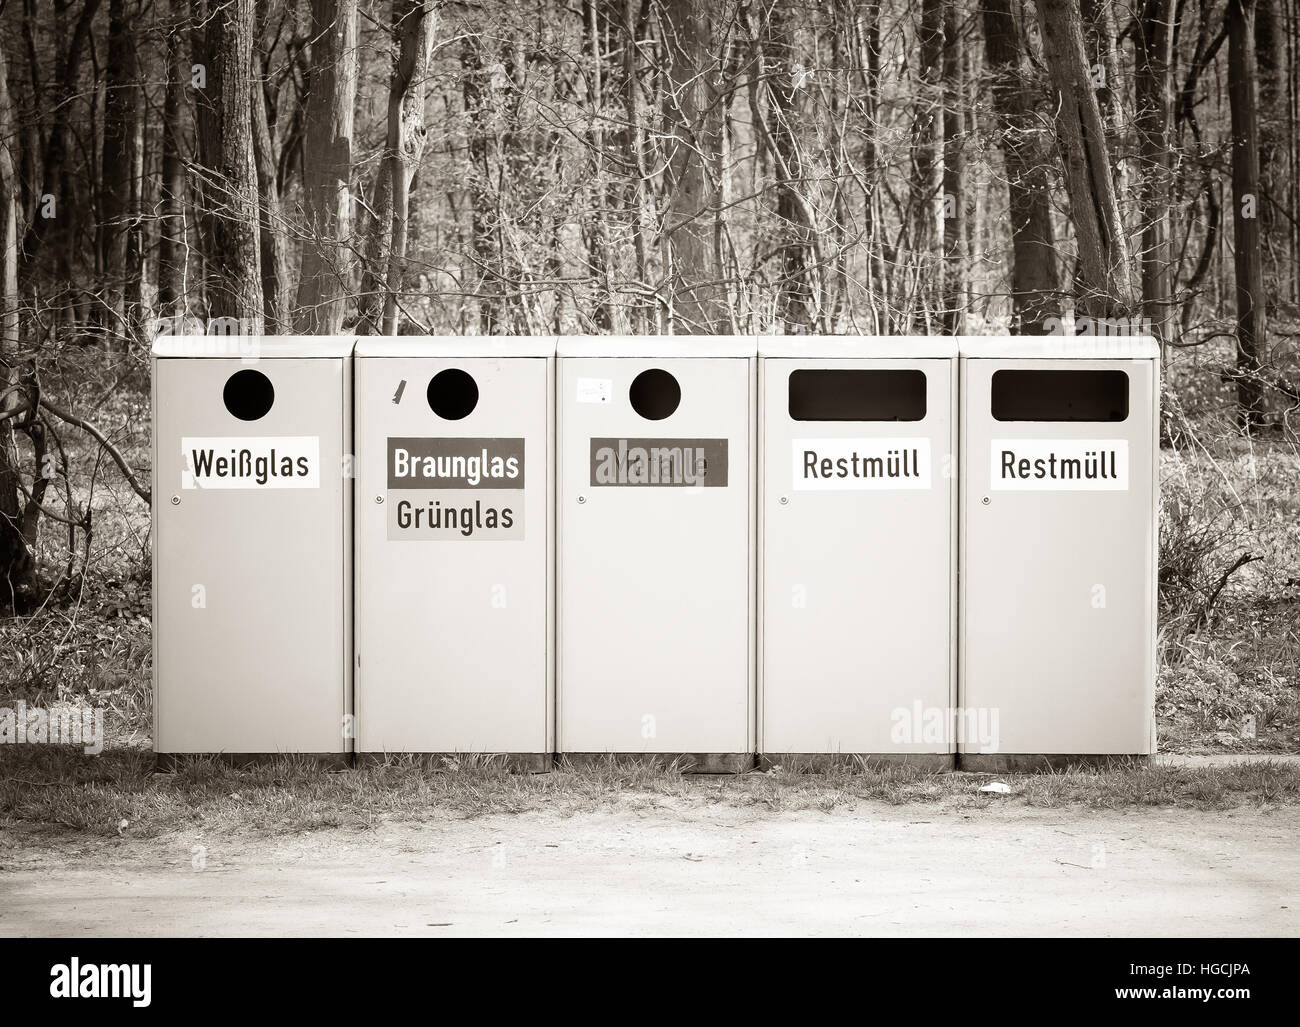 Recycle bins in nature Stock Photo